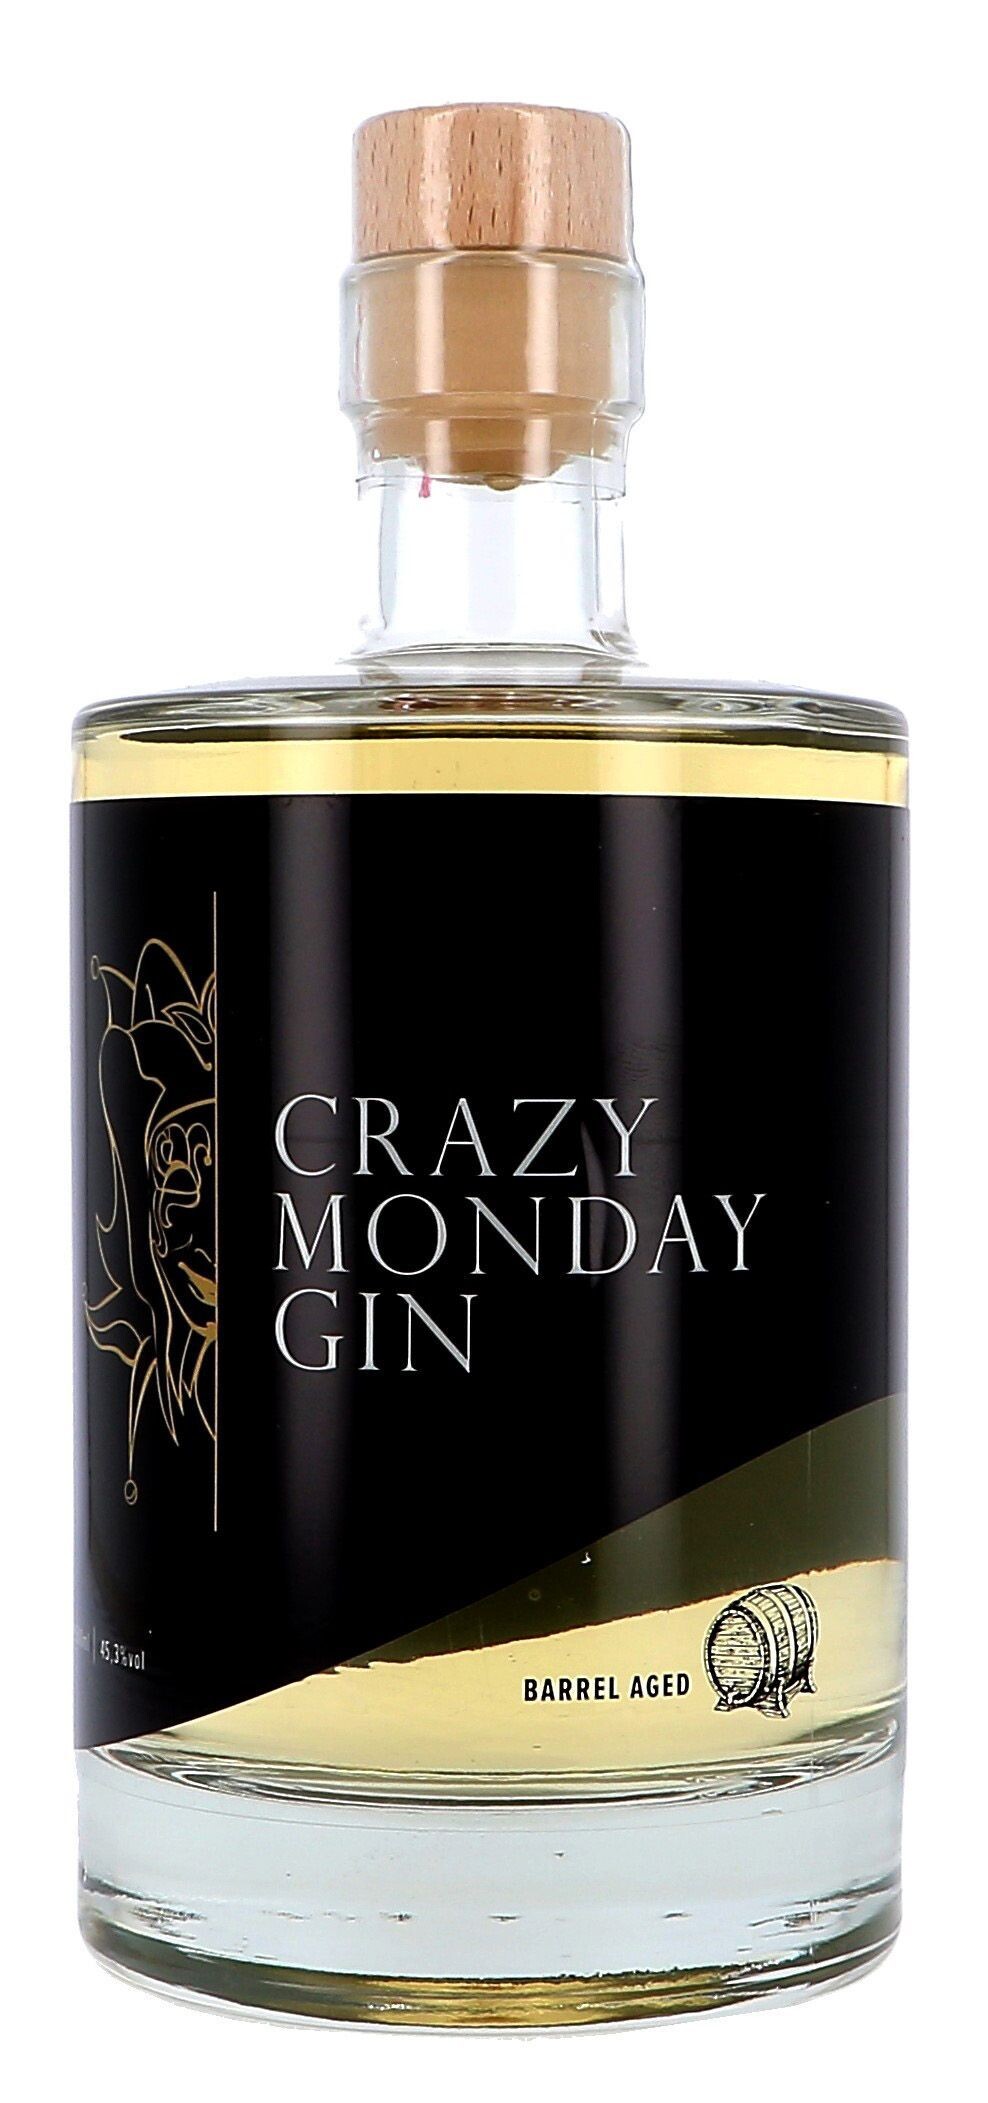 Gin Crazy Monday Barrel Aged 50cl 45.3% Belgie (Gin & Tonic)